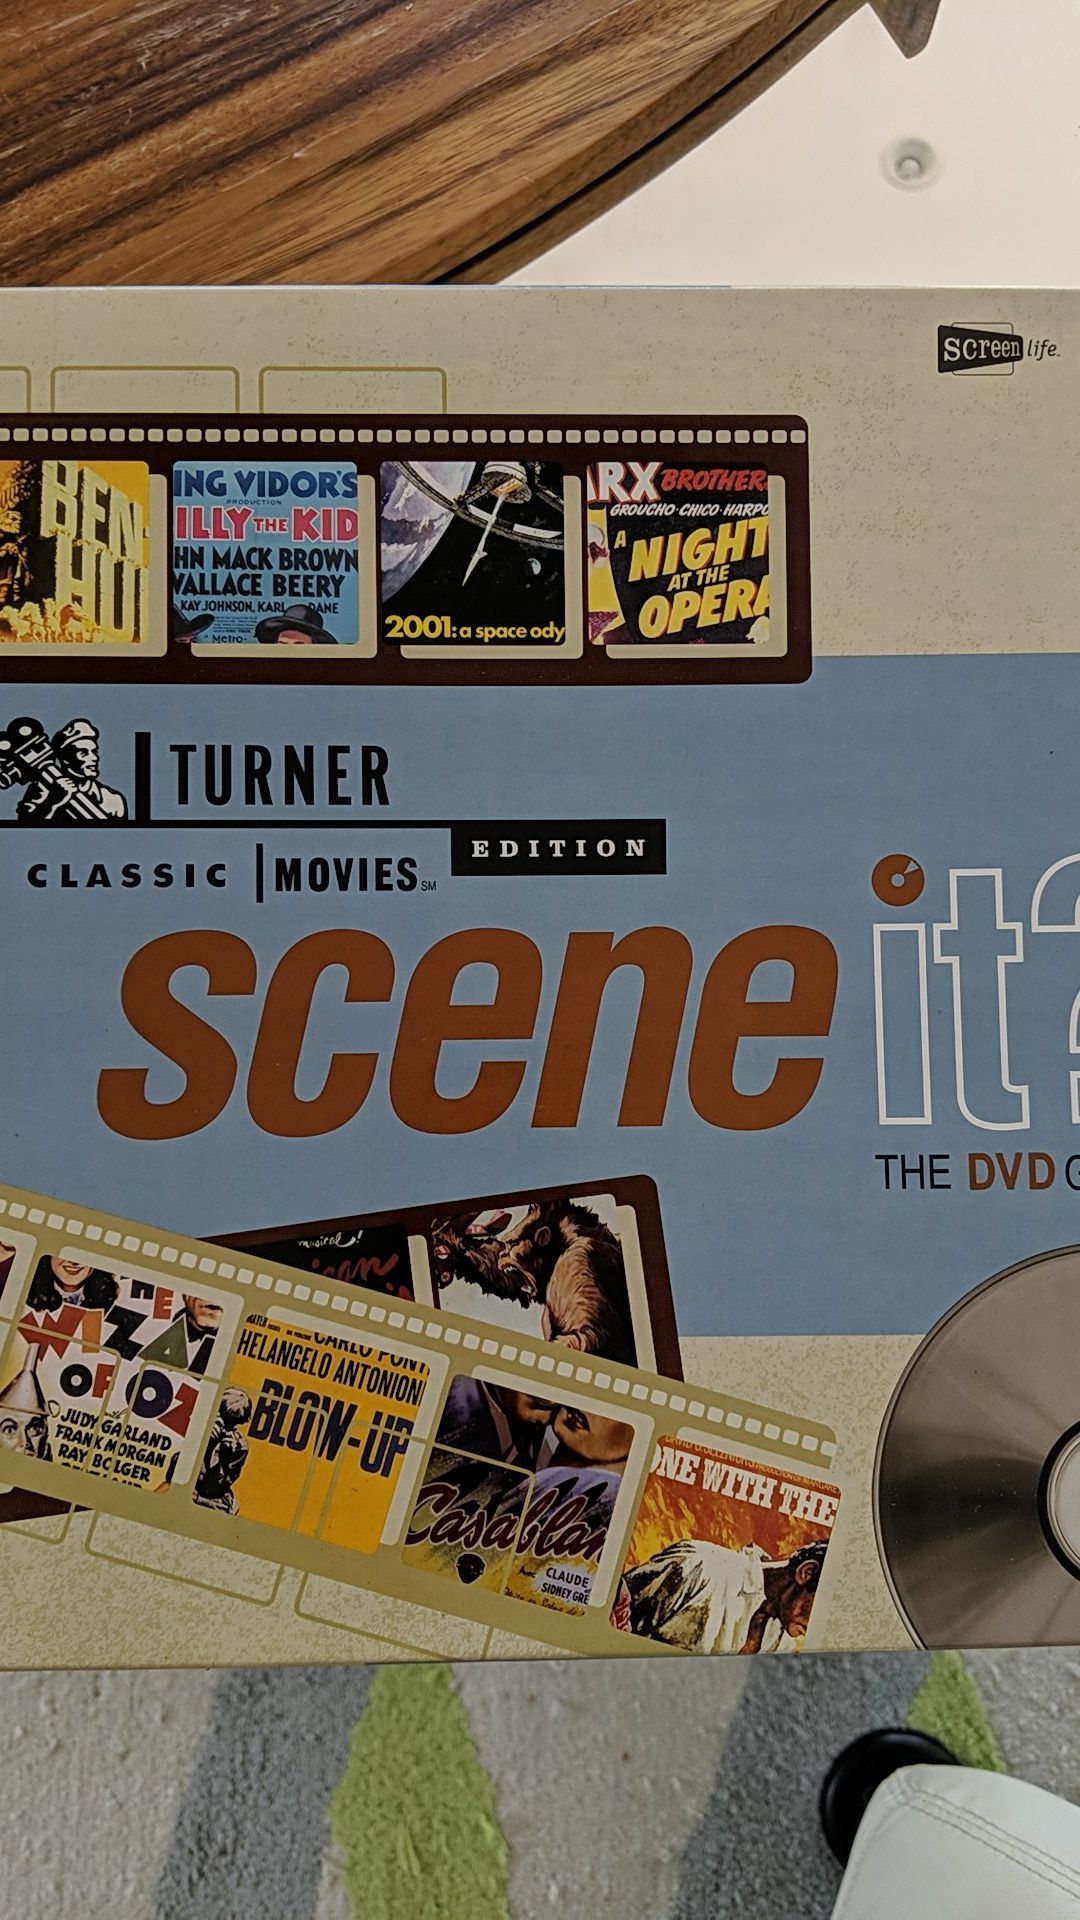 Scene it? DVD game classic movies edition